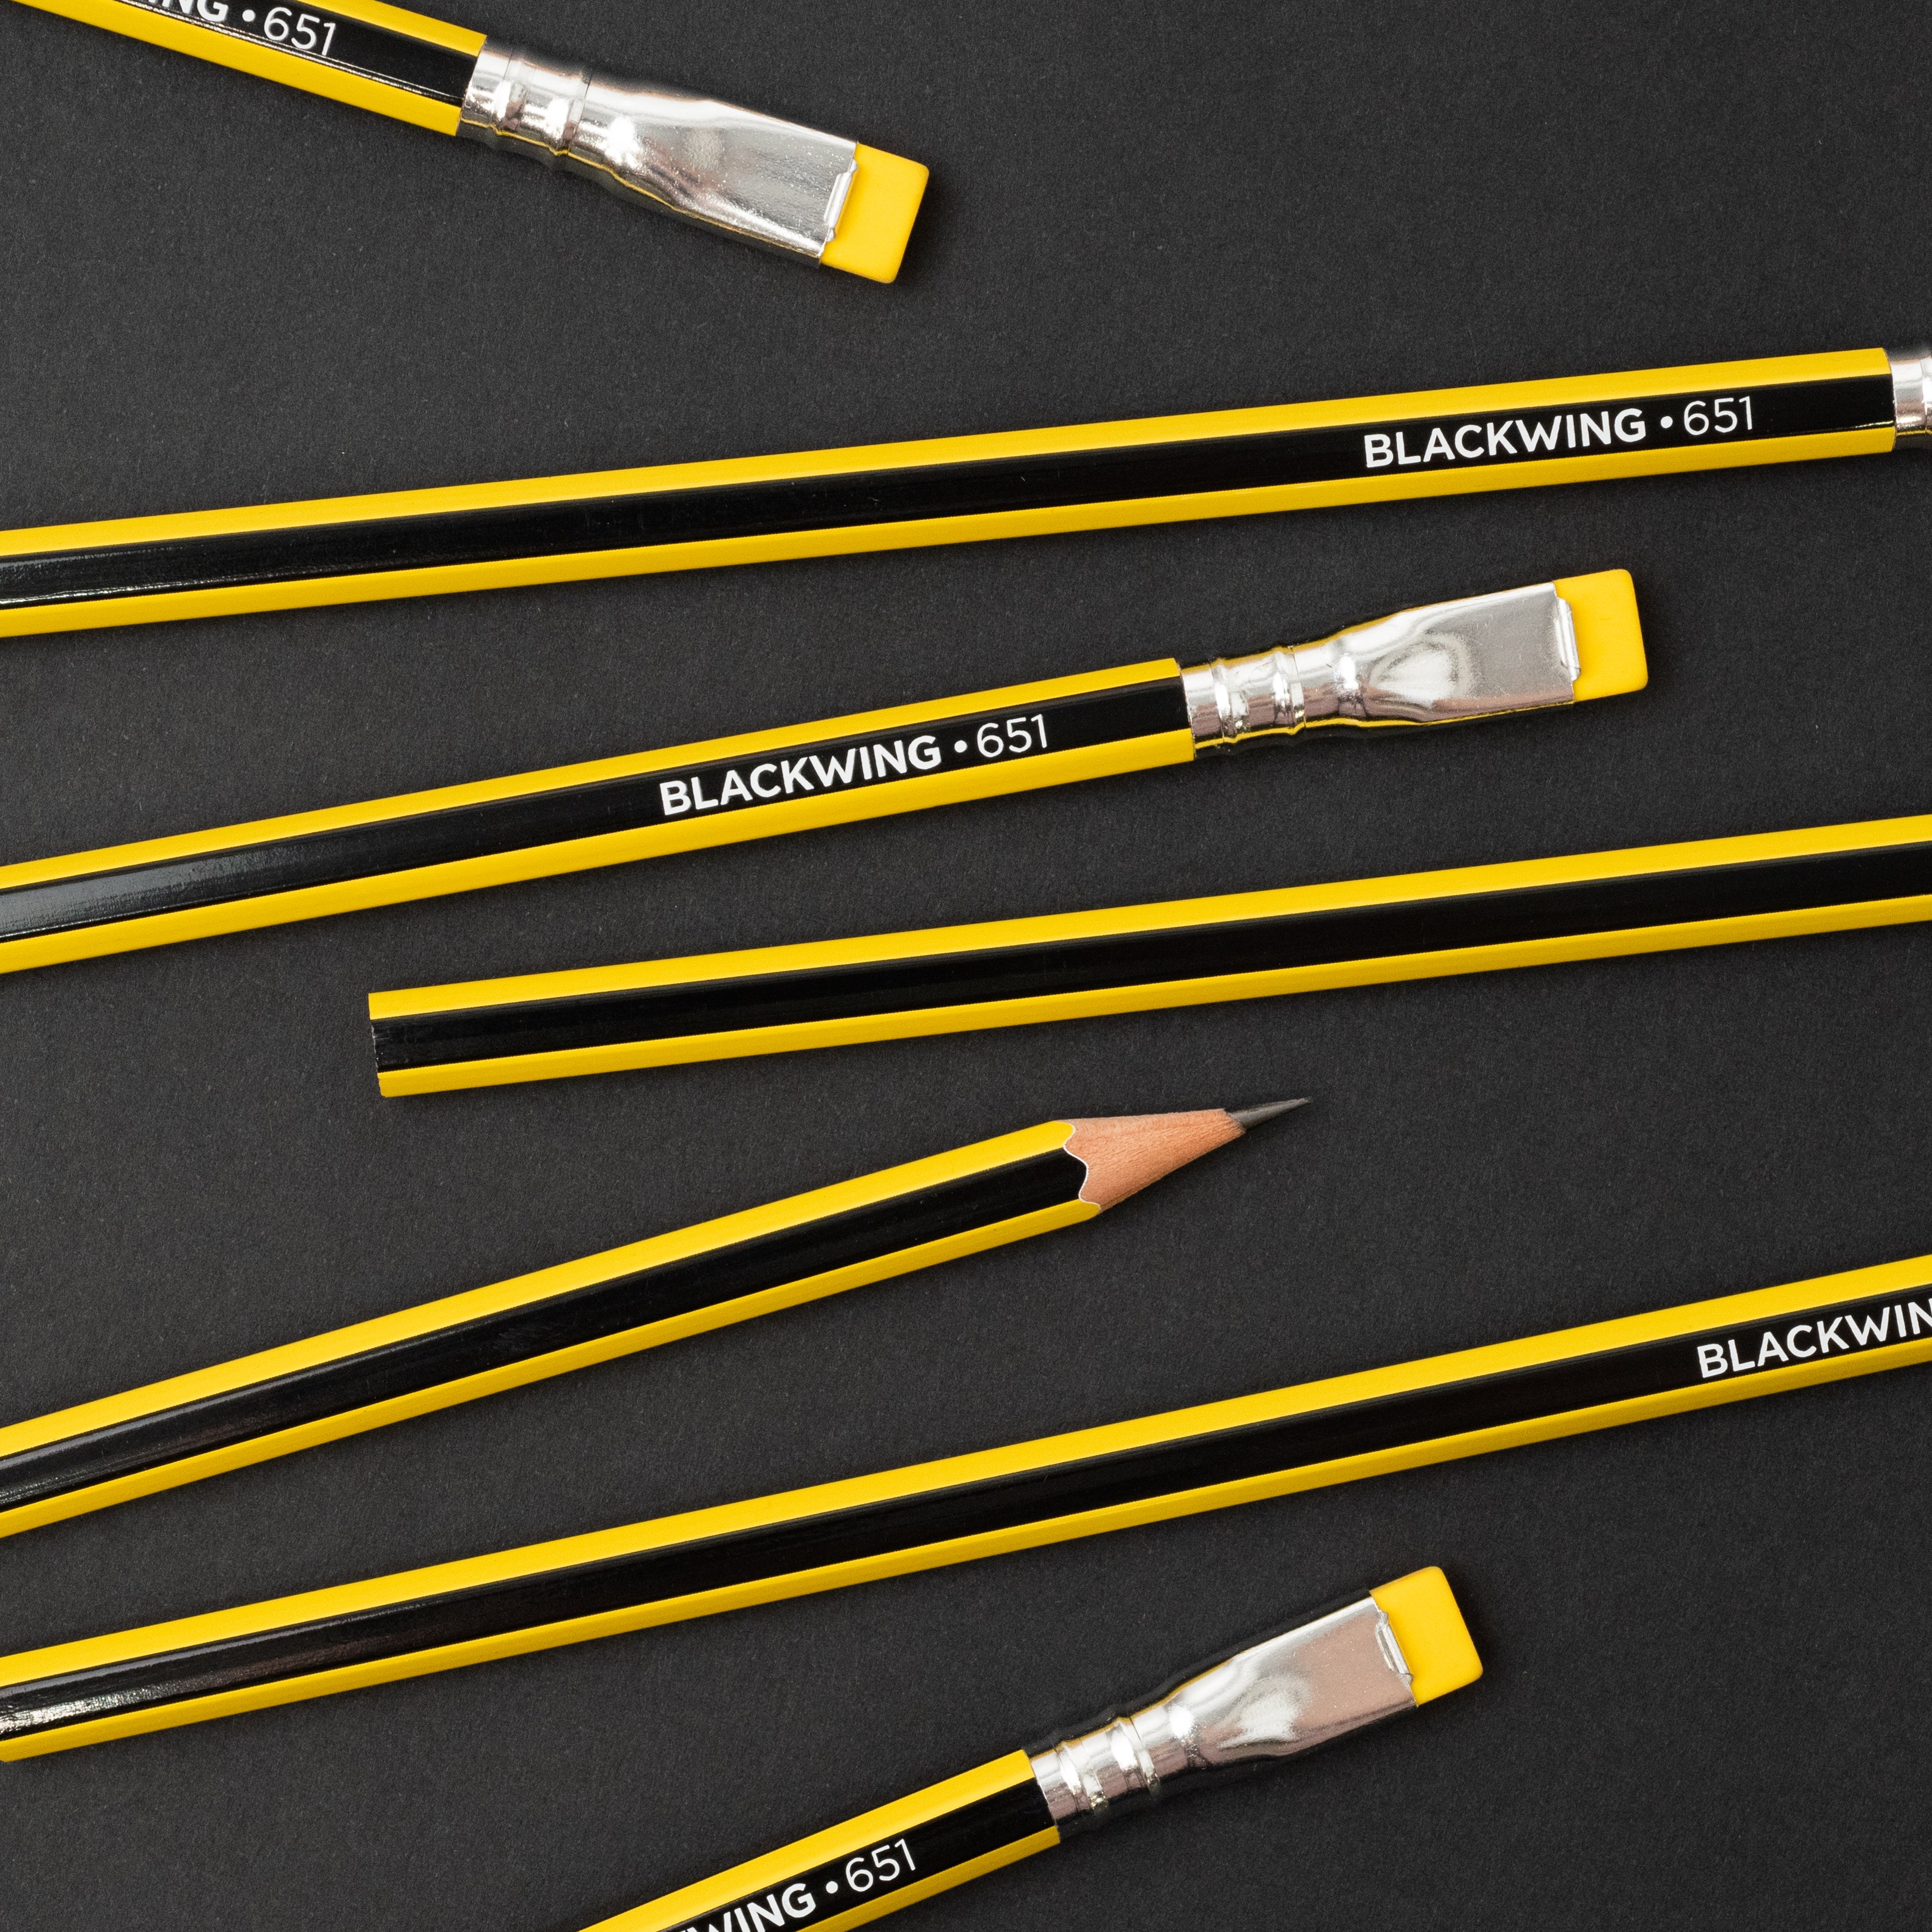 Blackwing Volumes 651- Bruce Lee Edition Pencil 12 Pack